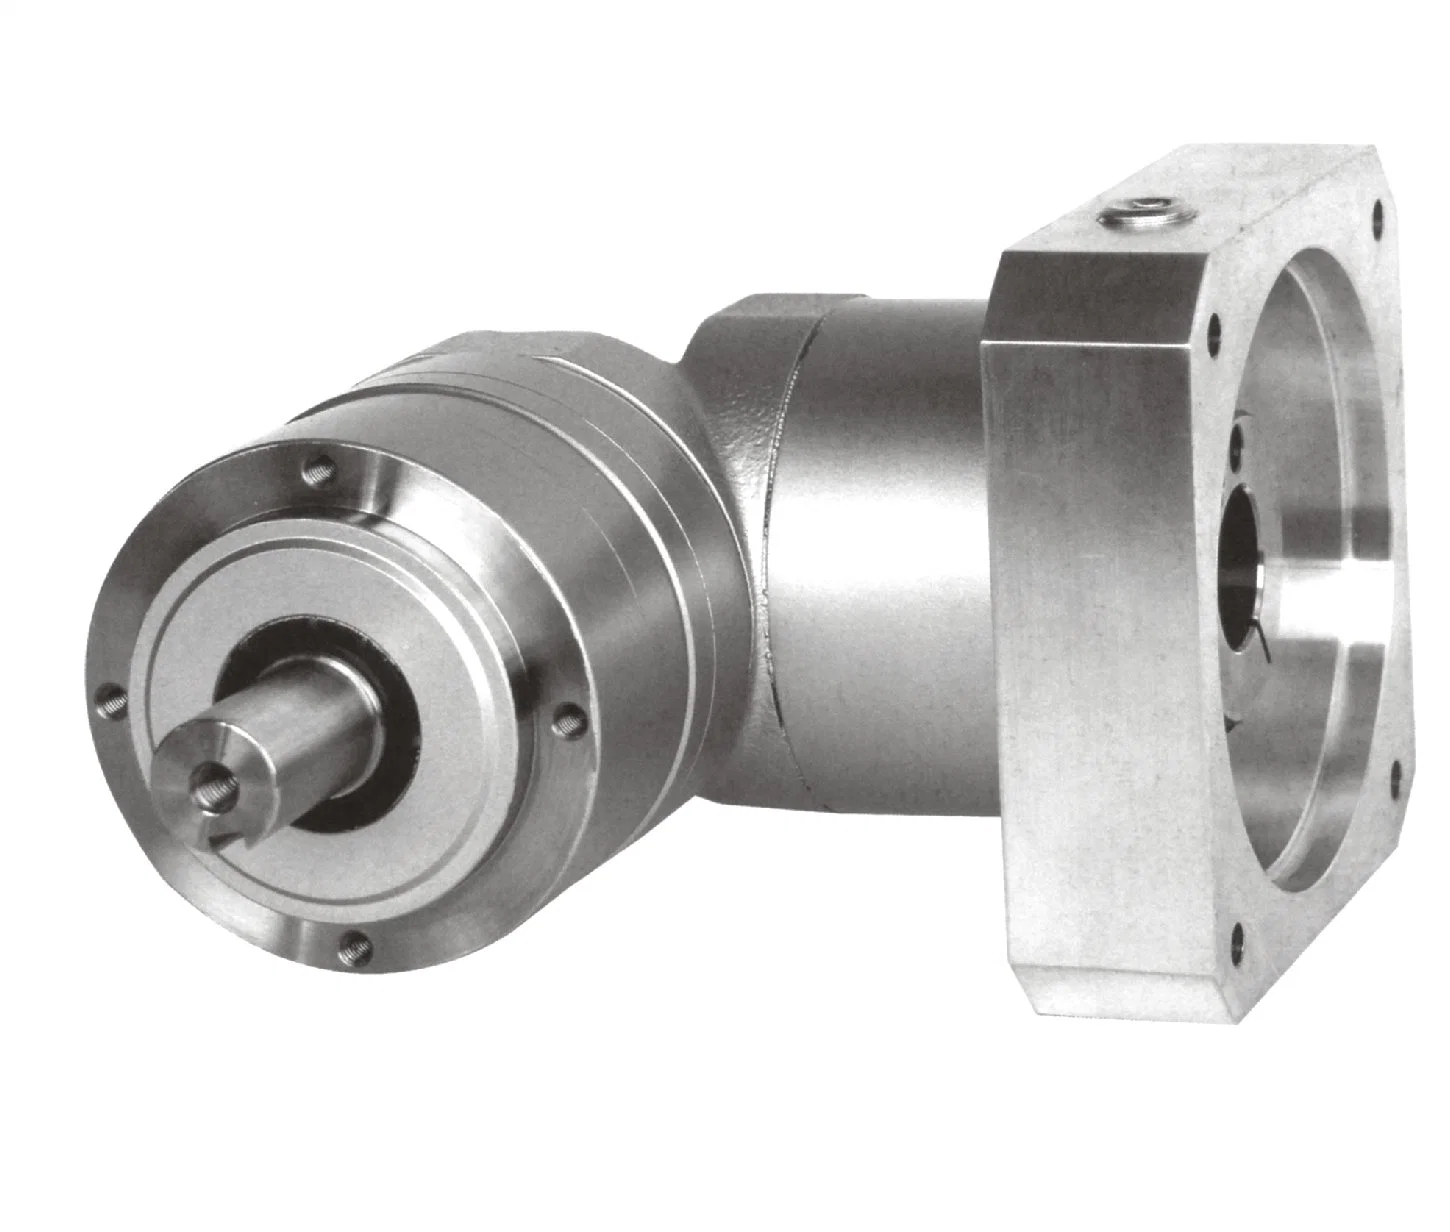 Transmission Right Angle Series Epel-070 Series Precision Planetary Reducer/Gearbox